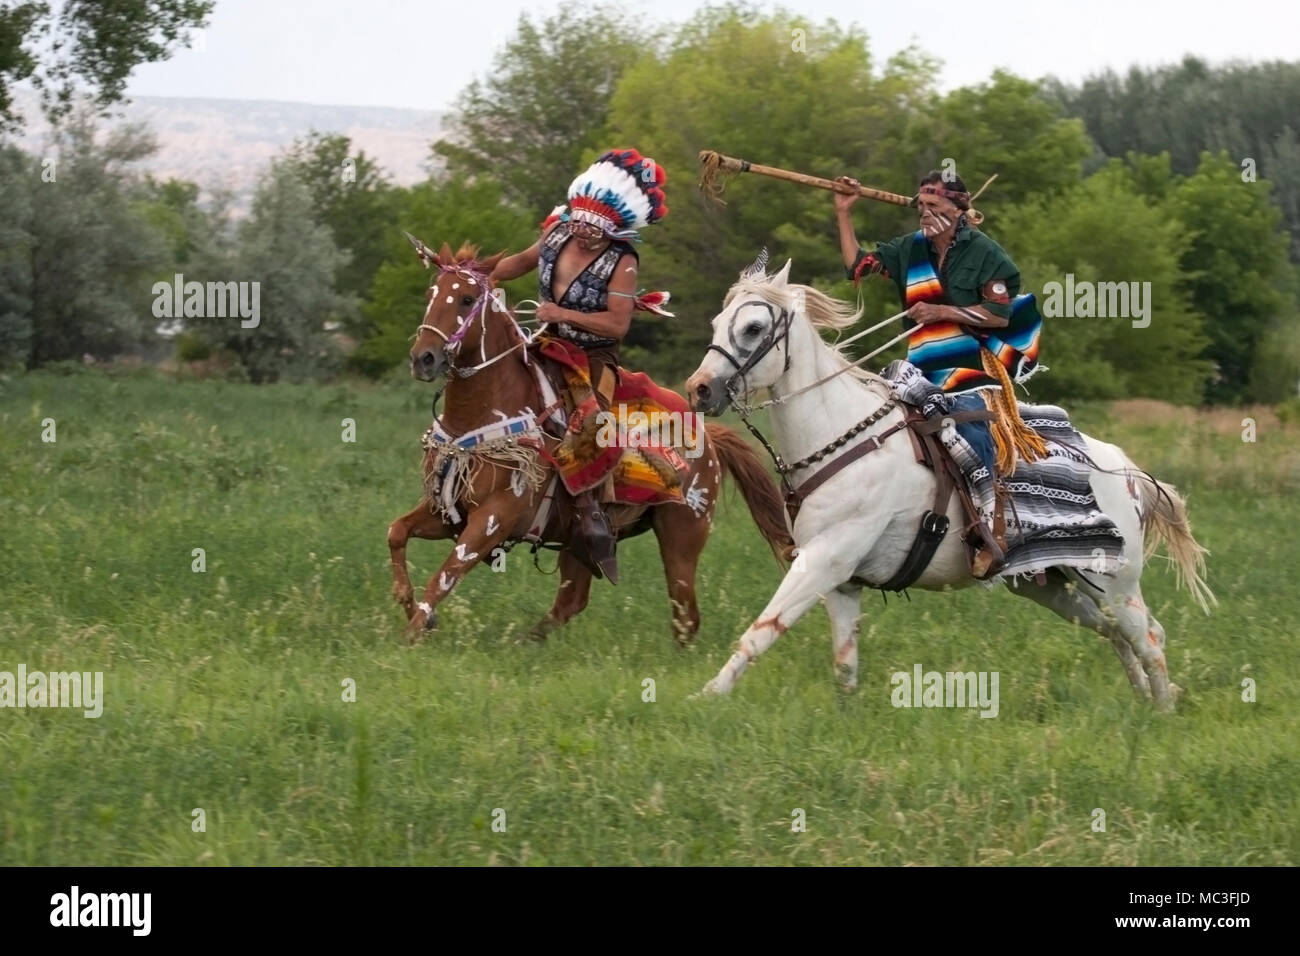 Warriors in Comanche clothing galloping horses through meadow Stock Photo